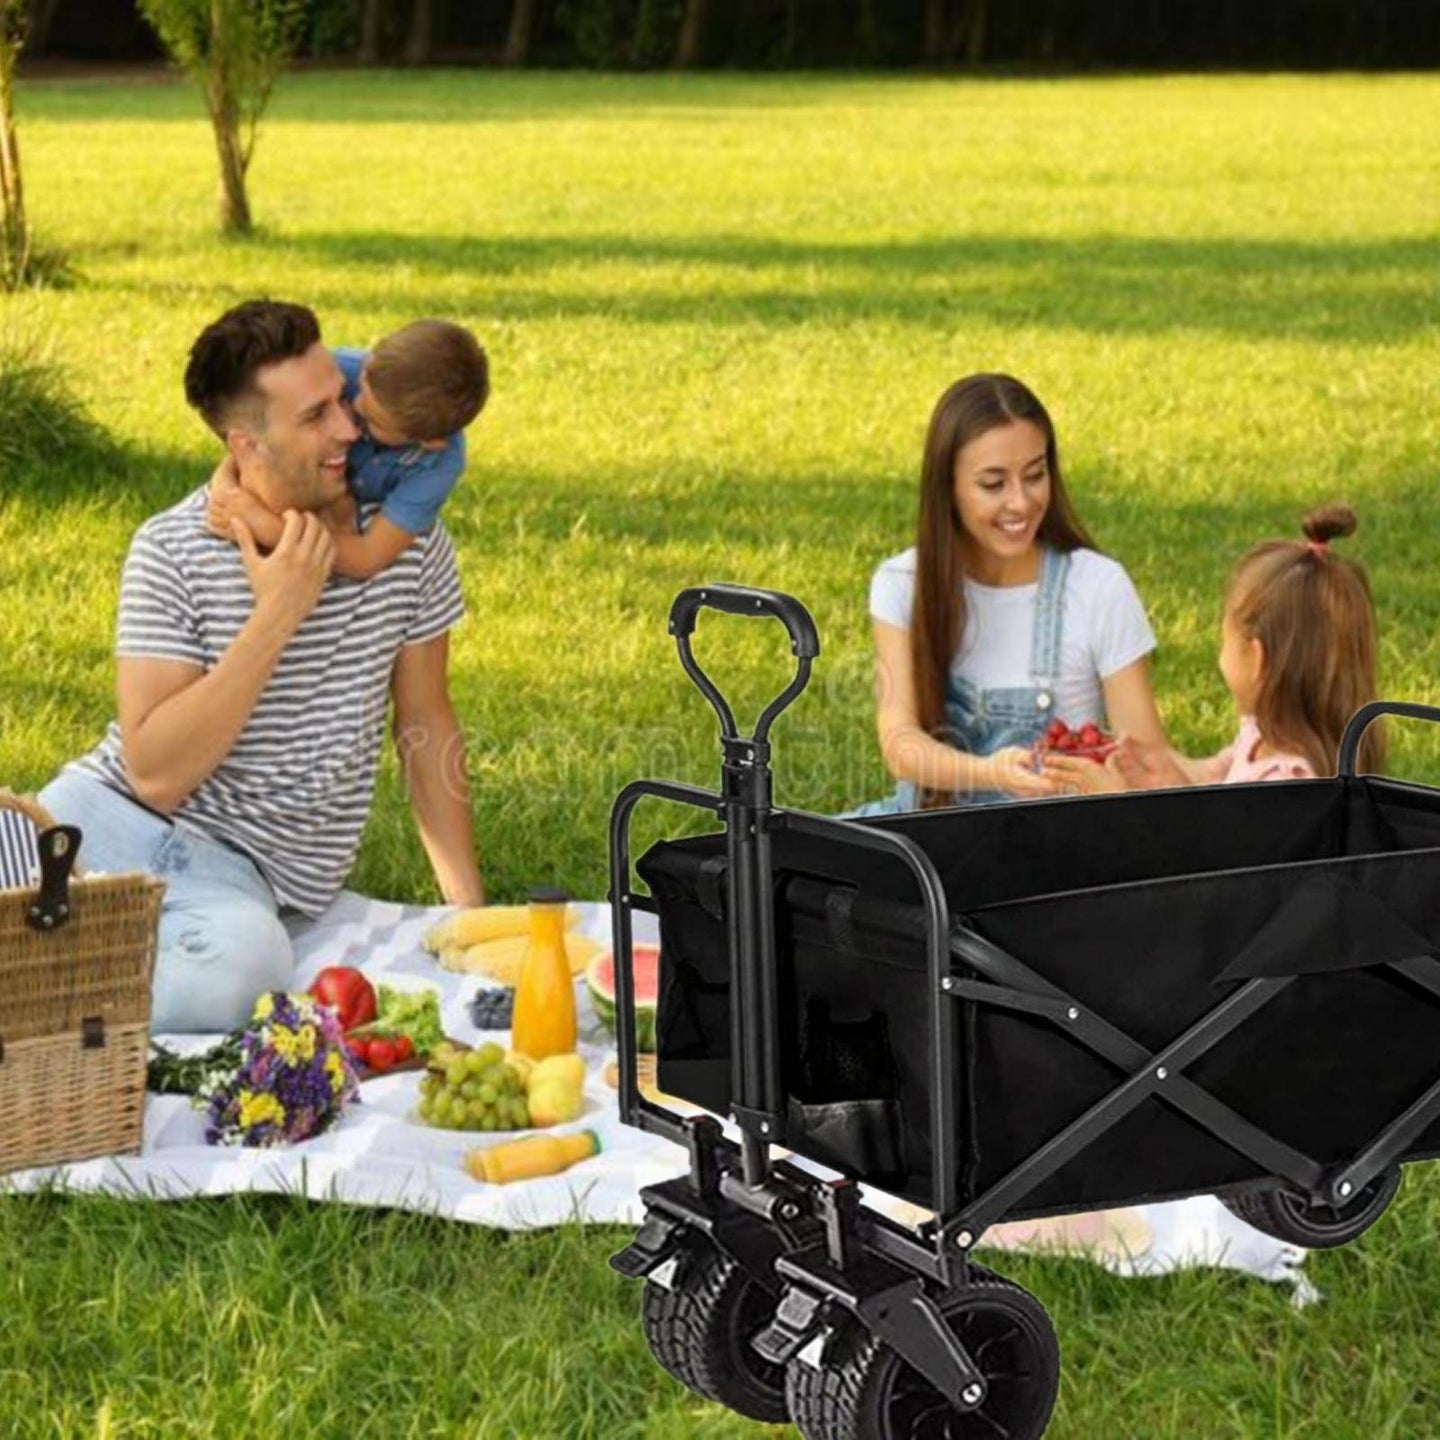 Buy 1PC Foldable Shopping Cart ( Black ), Heavy Duty Collapsible Wagon with All-Terrain 10cm Wheels, Load 150kg, Portable 160 Liter Large Capacity Beach Wagon, Camping, Garden, Beach Day, Picnics, Shopping, Outdoor Grocery Cart with Adjustable Handle discounted | Products On Sale Australia